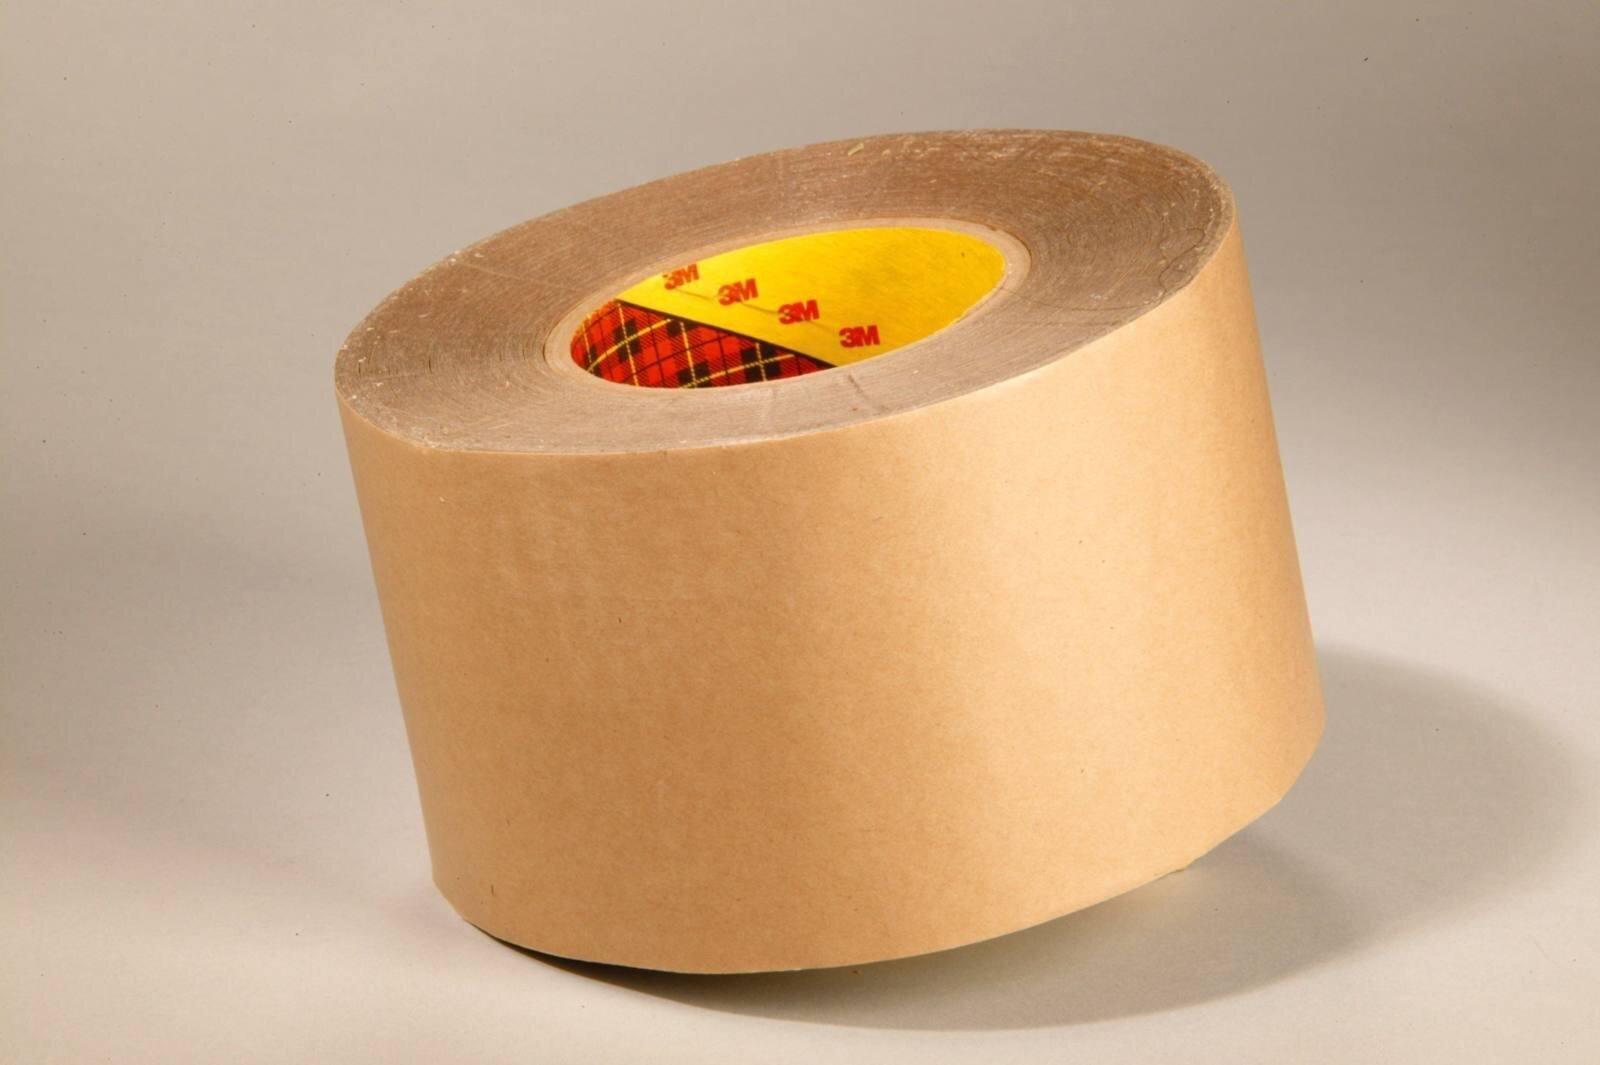 3M Double-sided adhesive tape with polyester backing 9425, transparent, 19 mm x 66 m, 0.14 mm